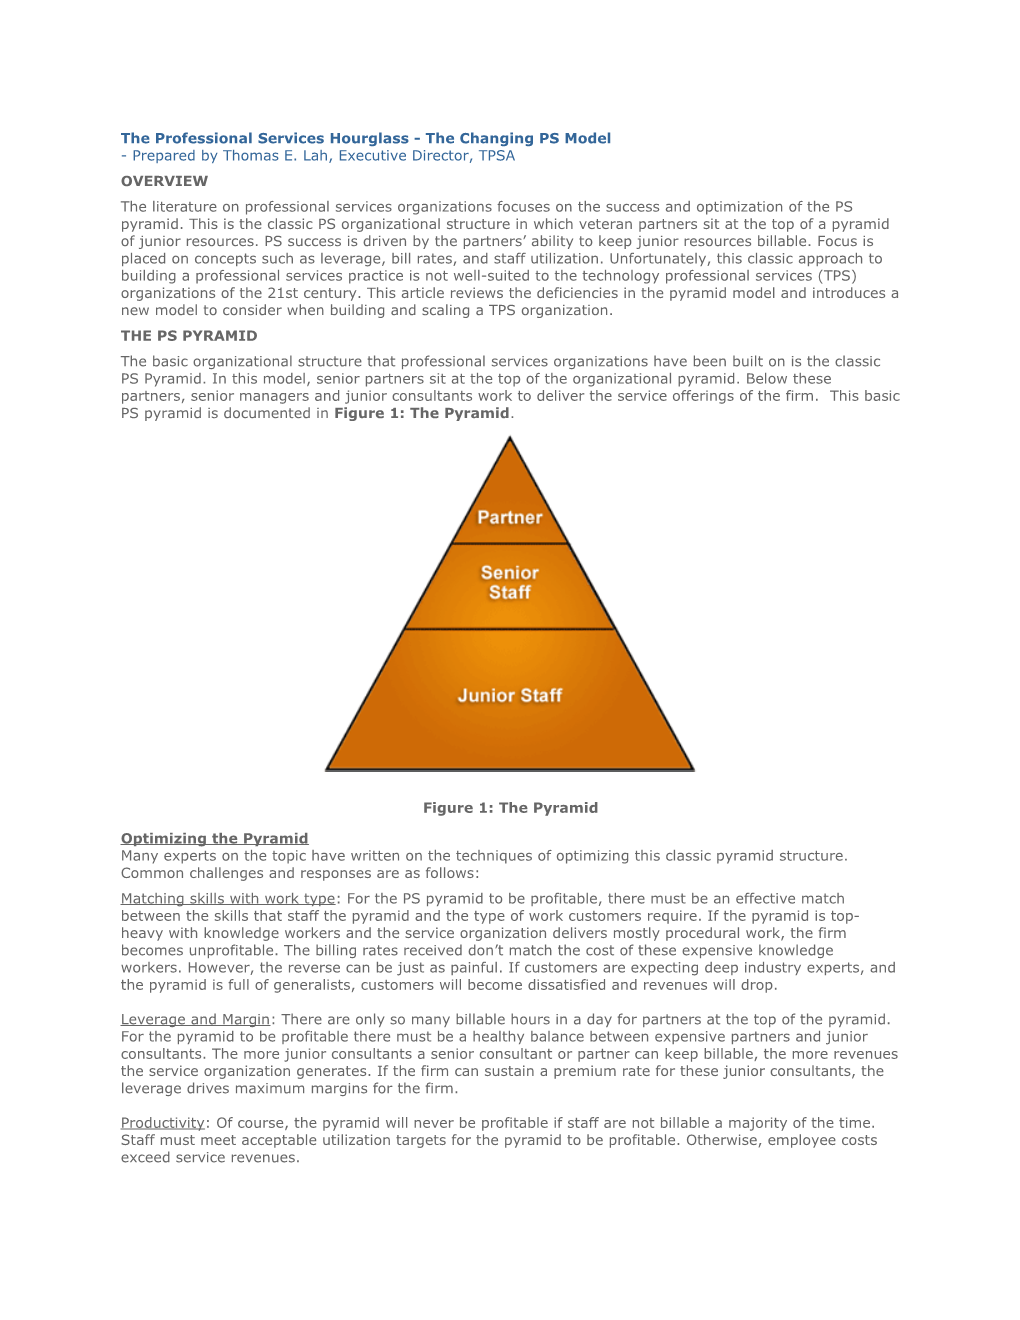 The Professional Services Hourglass - the Changing PS Model - Prepared by Thomas E. Lah